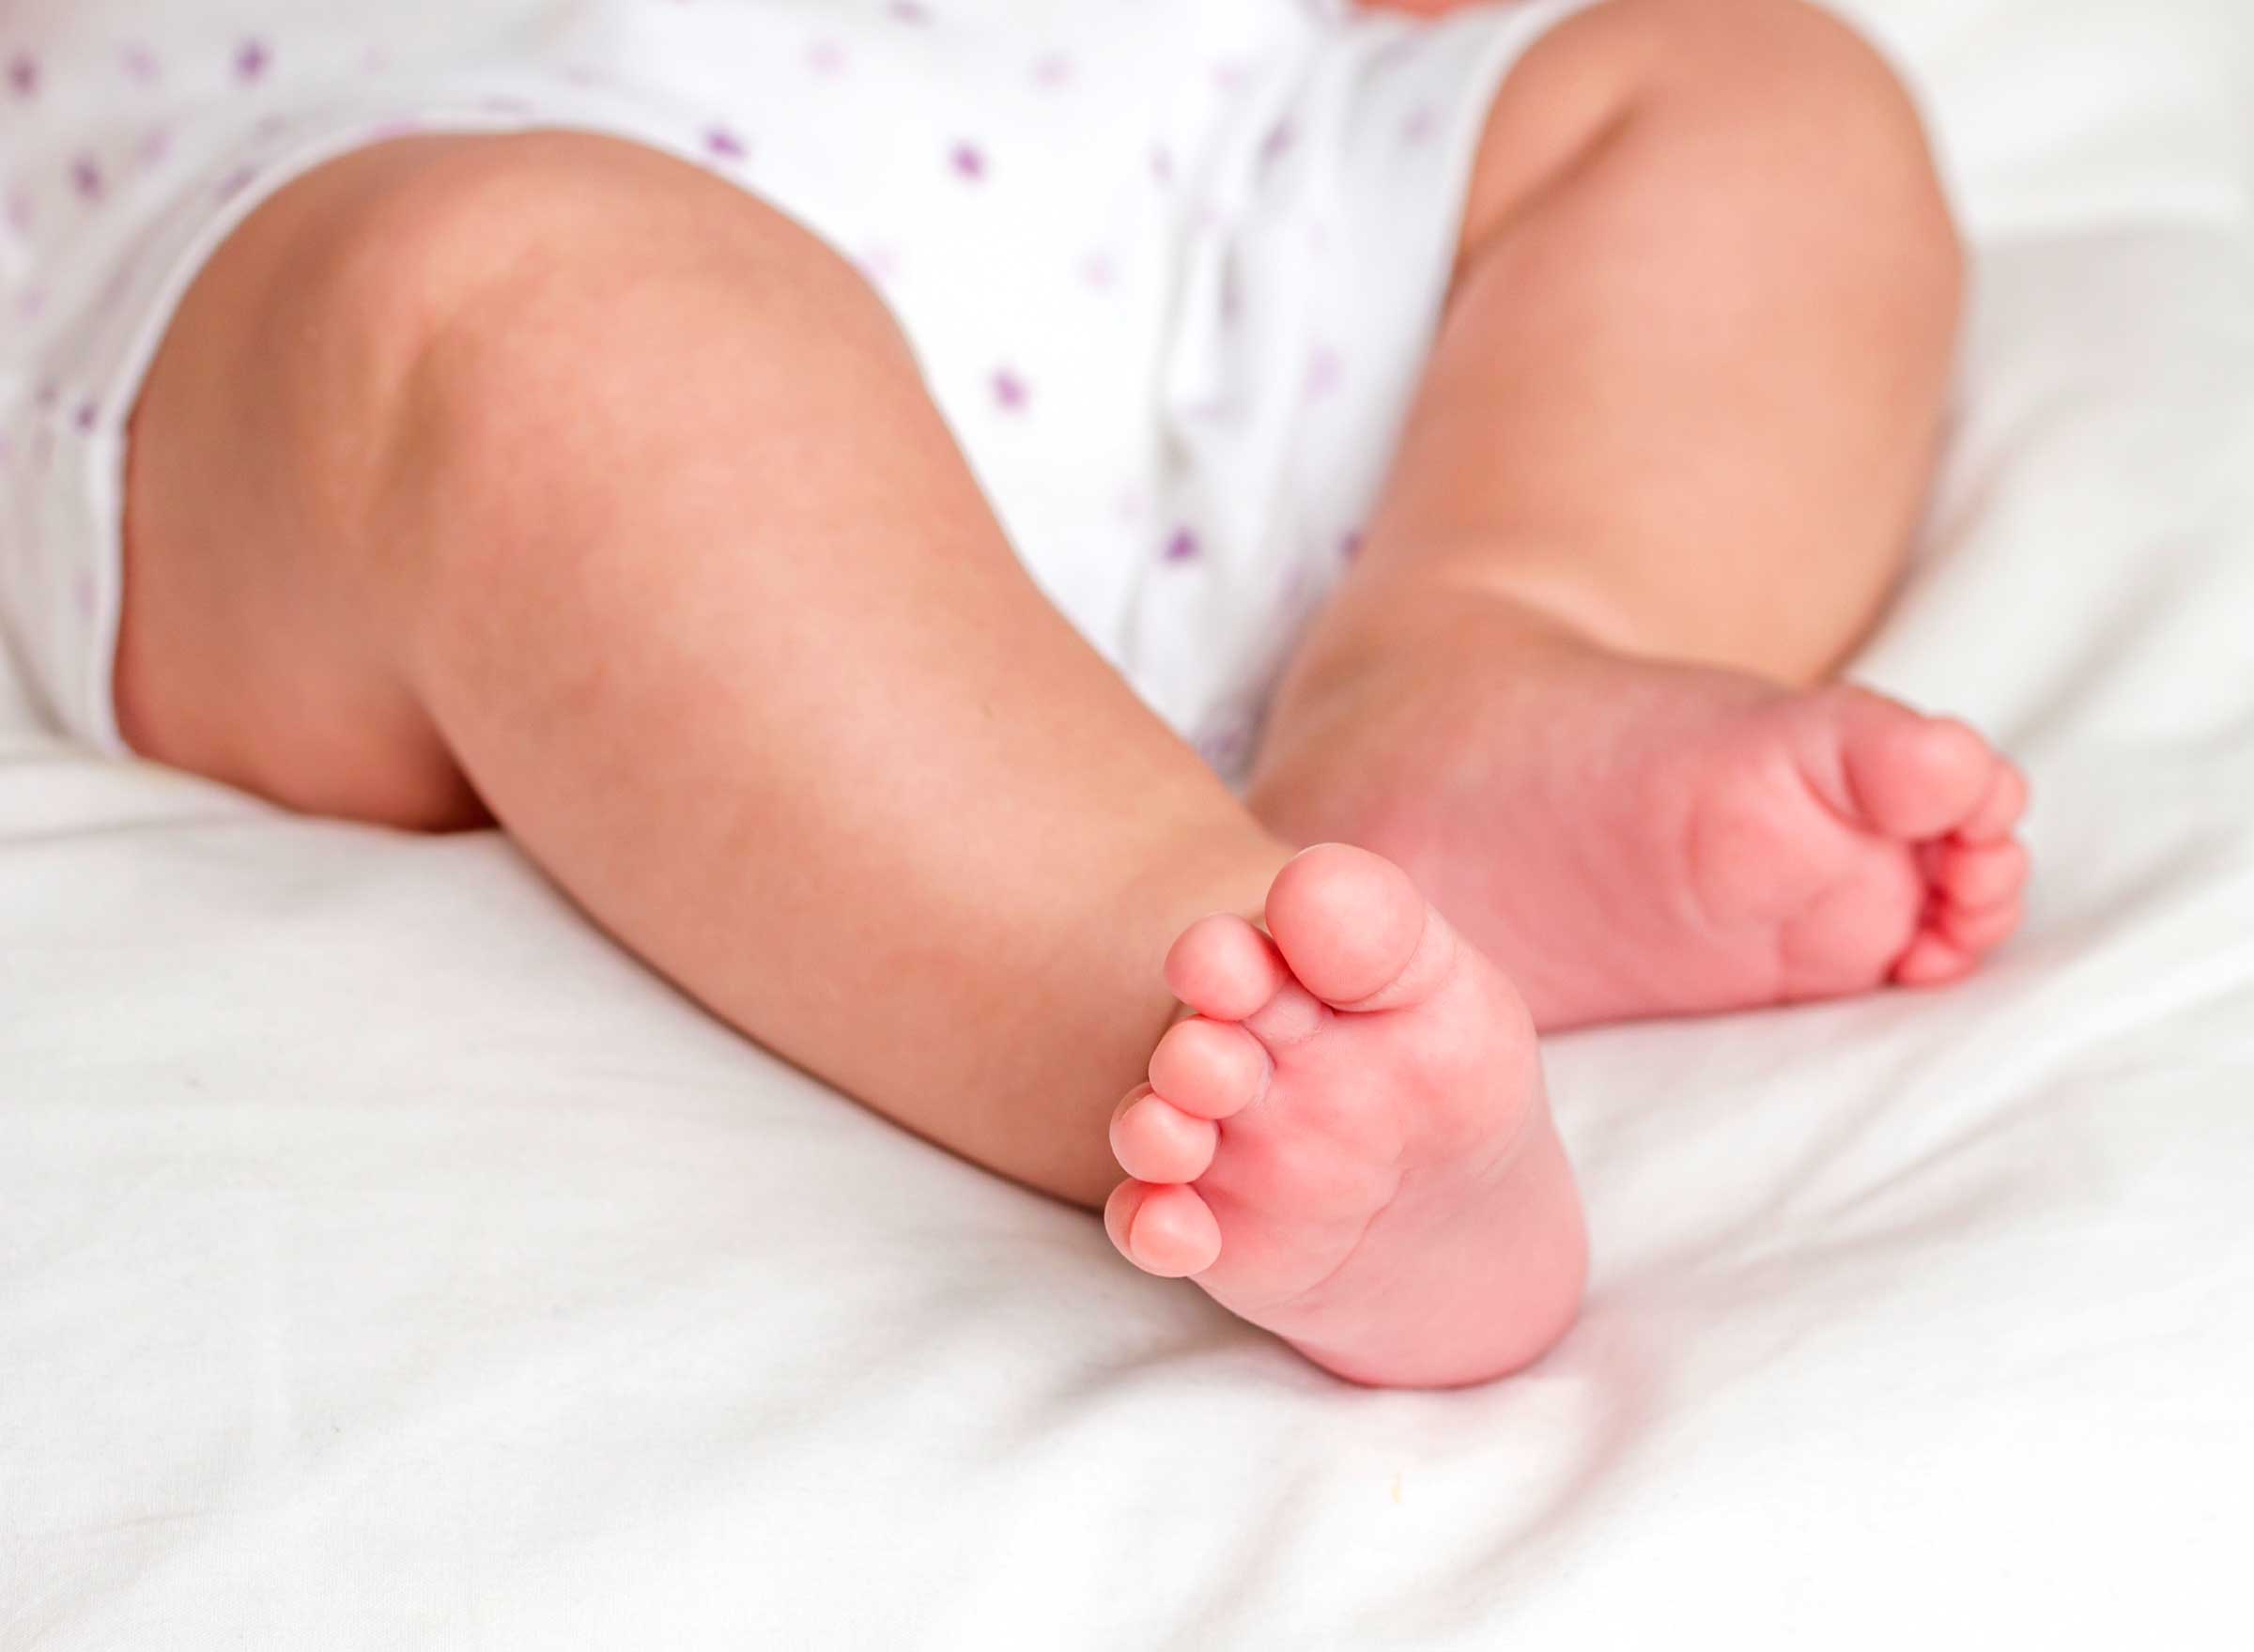 Do Babies Have Knees Or Kneecaps When They Are Born?